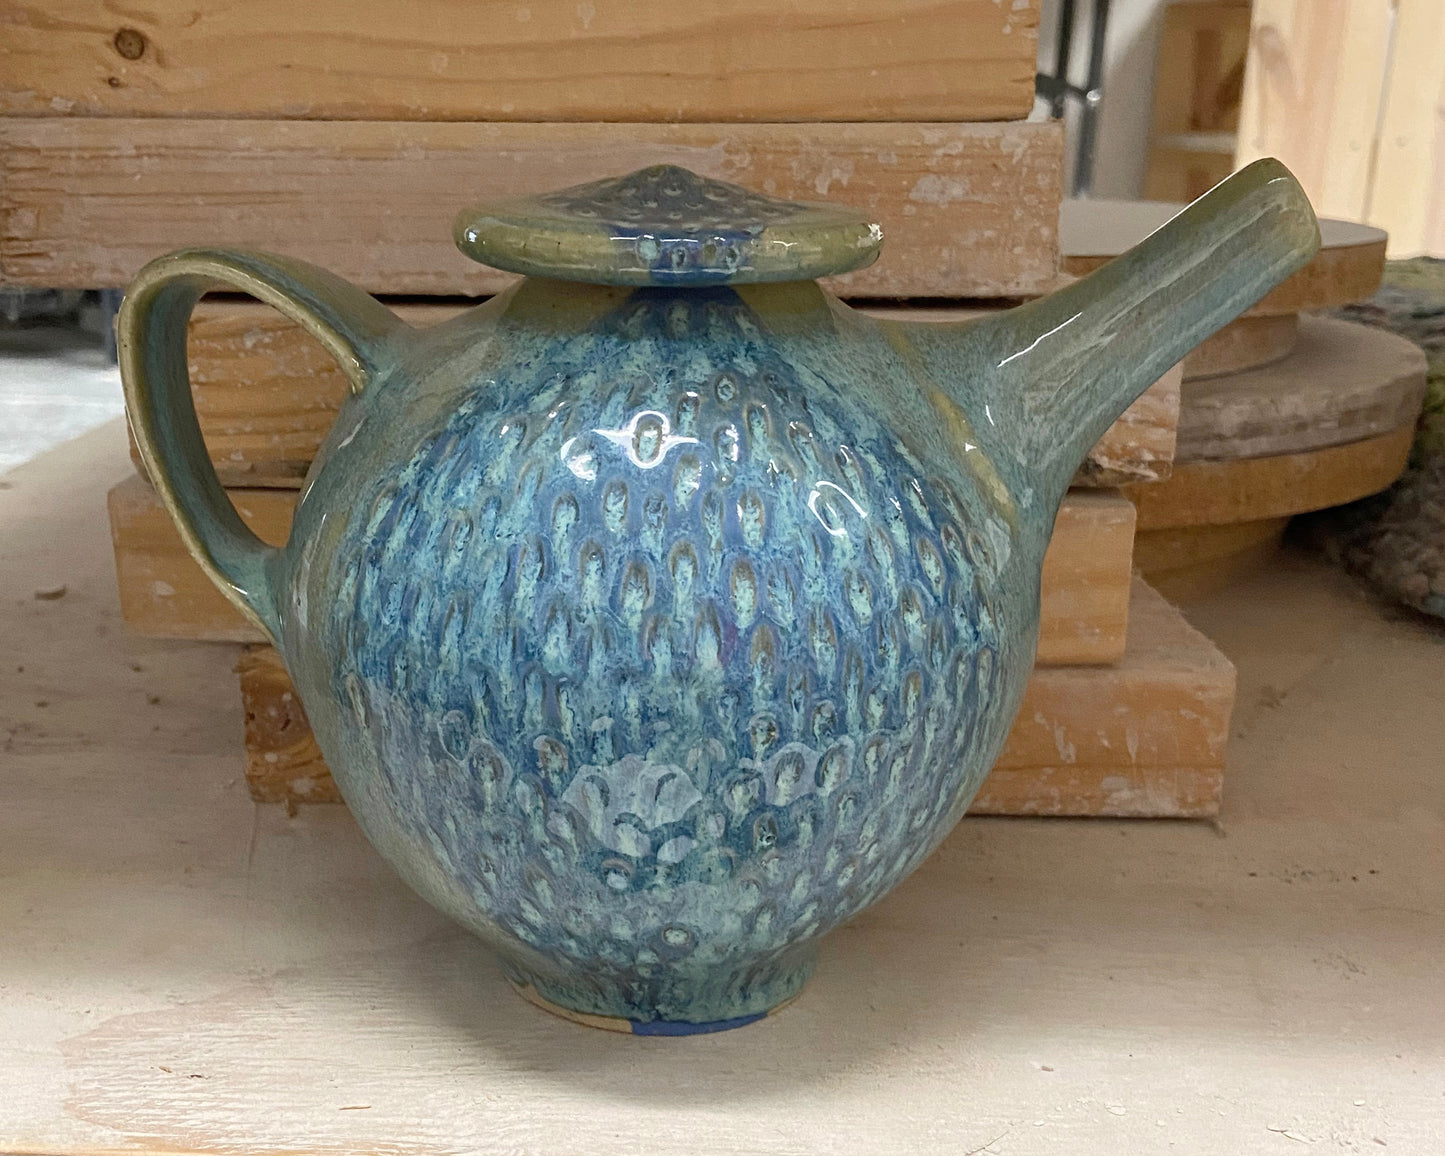 Carved Turquoise Teapot